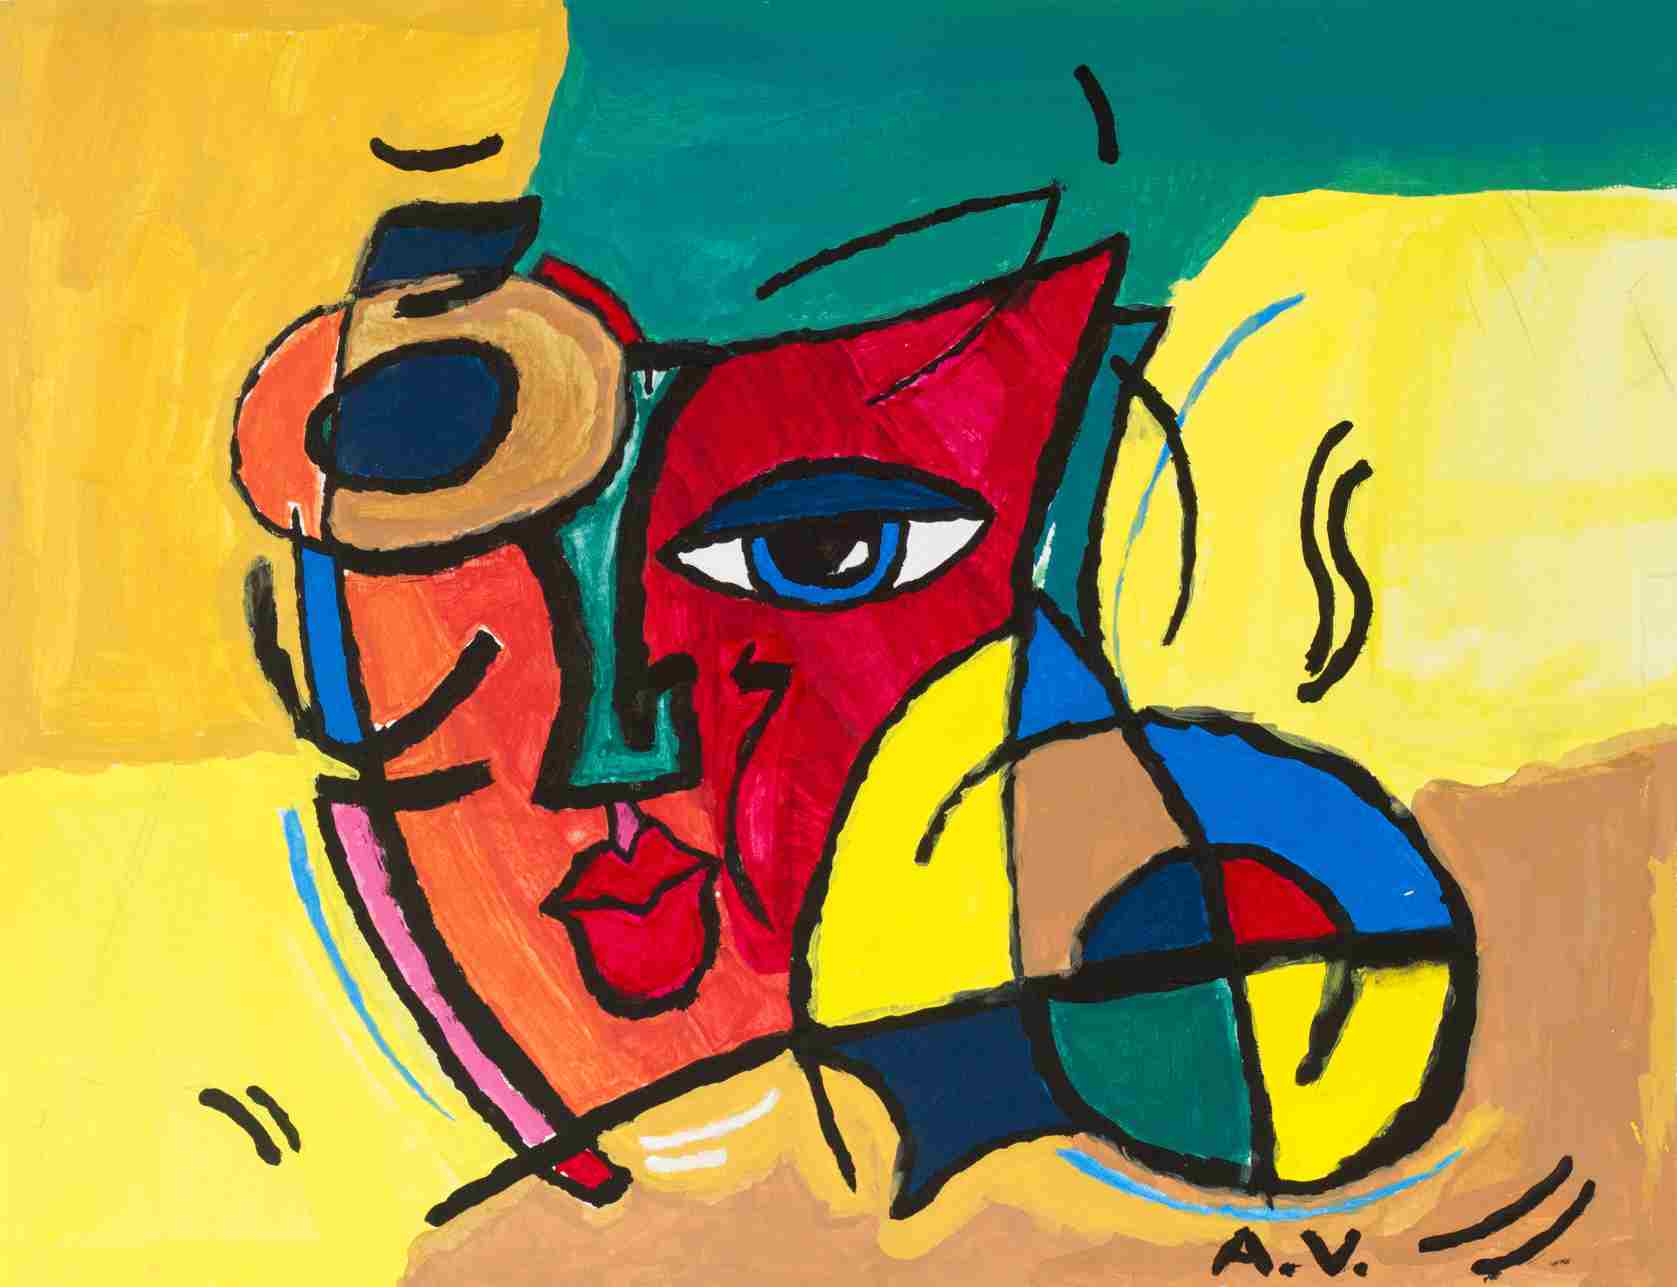 This is a painting by Akilan. The painting appears to be a vibrant and colorful abstract piece. It features bold, interlocking shapes and contrasting colors that create a fragmented, face-like structure. Dominant hues of yellow, red, and blue are accented with touches of green and black lines. The composition suggests a cubist influence, with geometric forms that might represent facial features—such as an eye, lips, and possibly a nose—though these elements are highly stylized and abstracted. The background is divided into blocks of color, giving the impression of a patchwork.